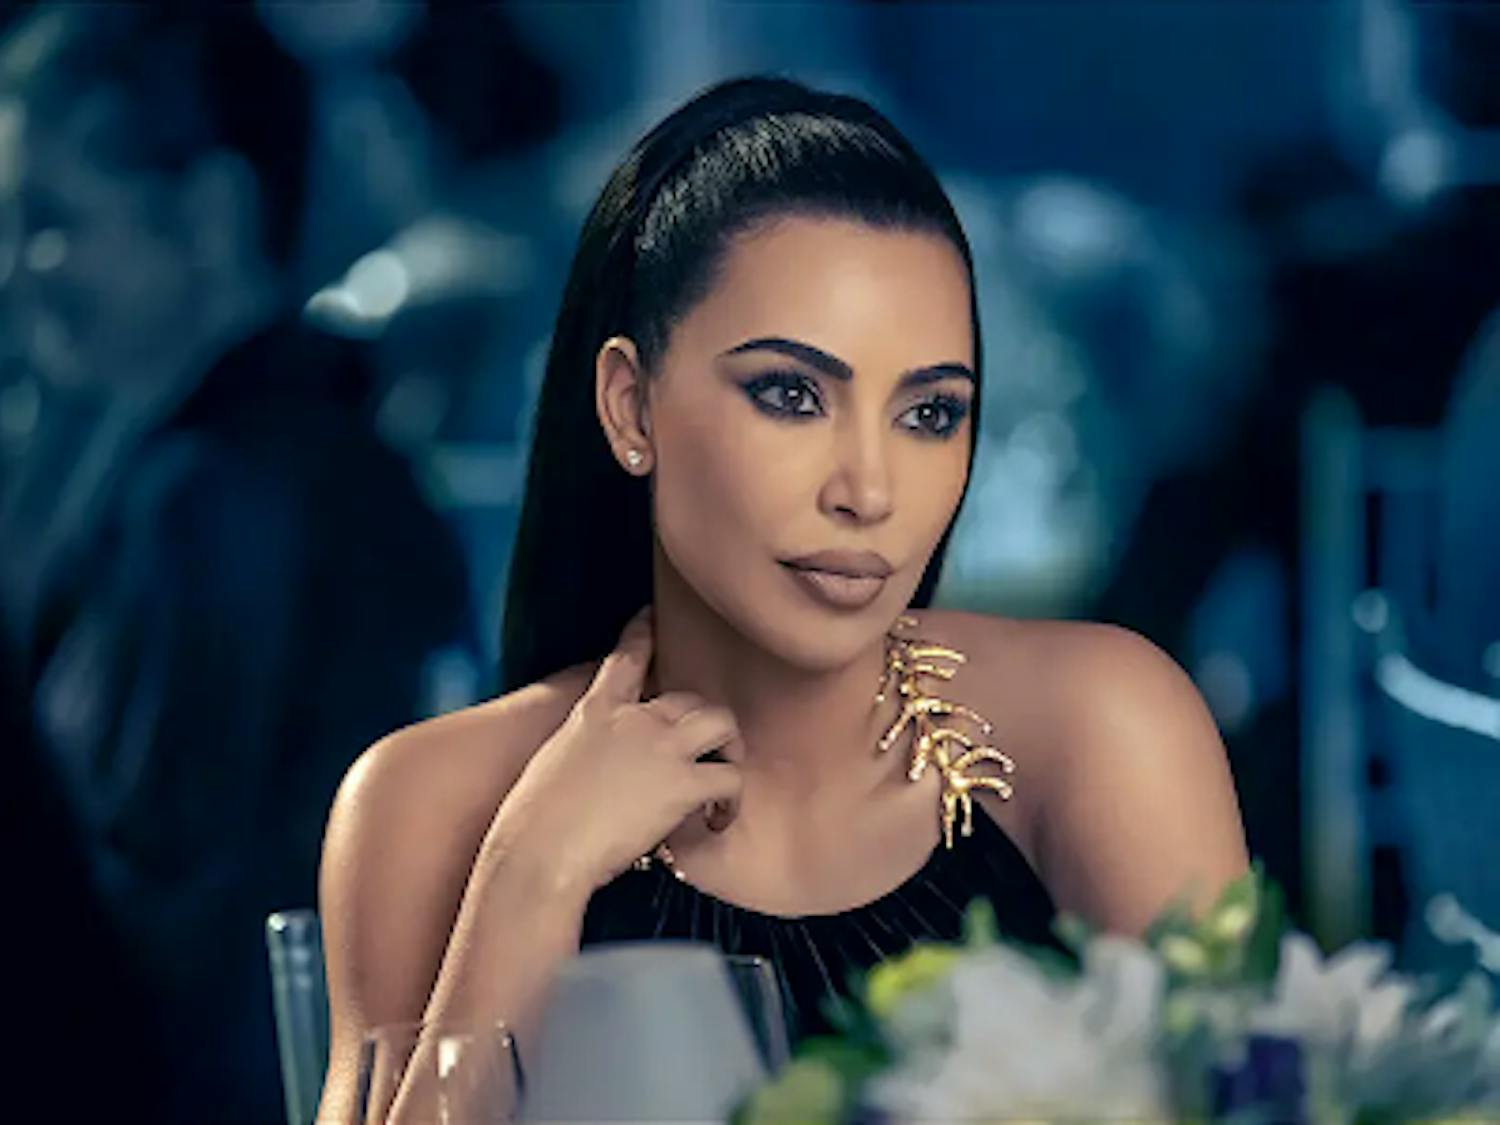 Using the climate crisis as a marketing strategy is proof of just how out of touch celebrities like Kardashian are. She has the privilege to joke about it because the effects of it will not personally impact her — or if they start to, she has the safety blanket of a disposable income. (Photo courtesy of IMDb).